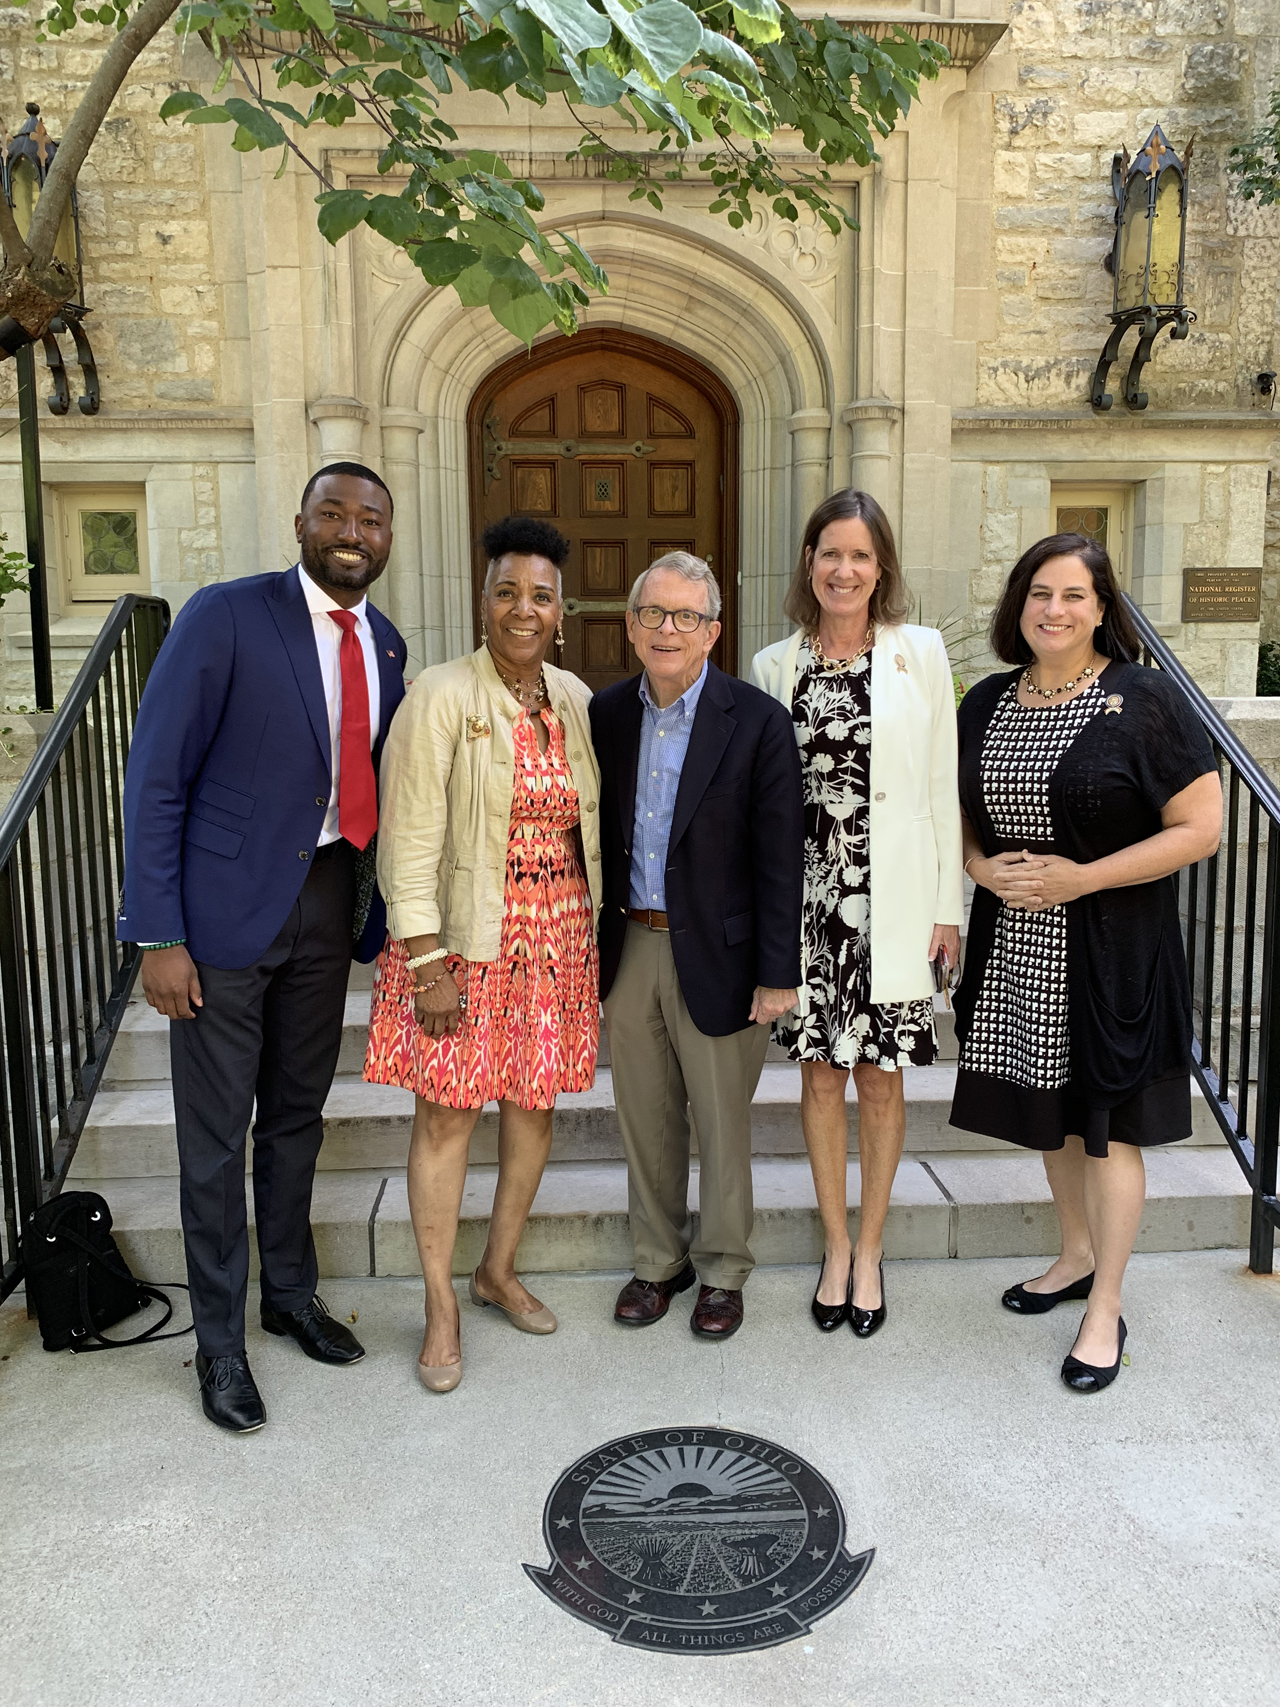 Rep. Ingram attends a bipartisan breakfast at the Governor's mansion alongside Rep. Terrence Upchurch (D-Cleveland), Gov. Mike DeWine, Rep. Tracy Richardson (R-Marysville) and Rep. Beth Liston (D-Dublin)